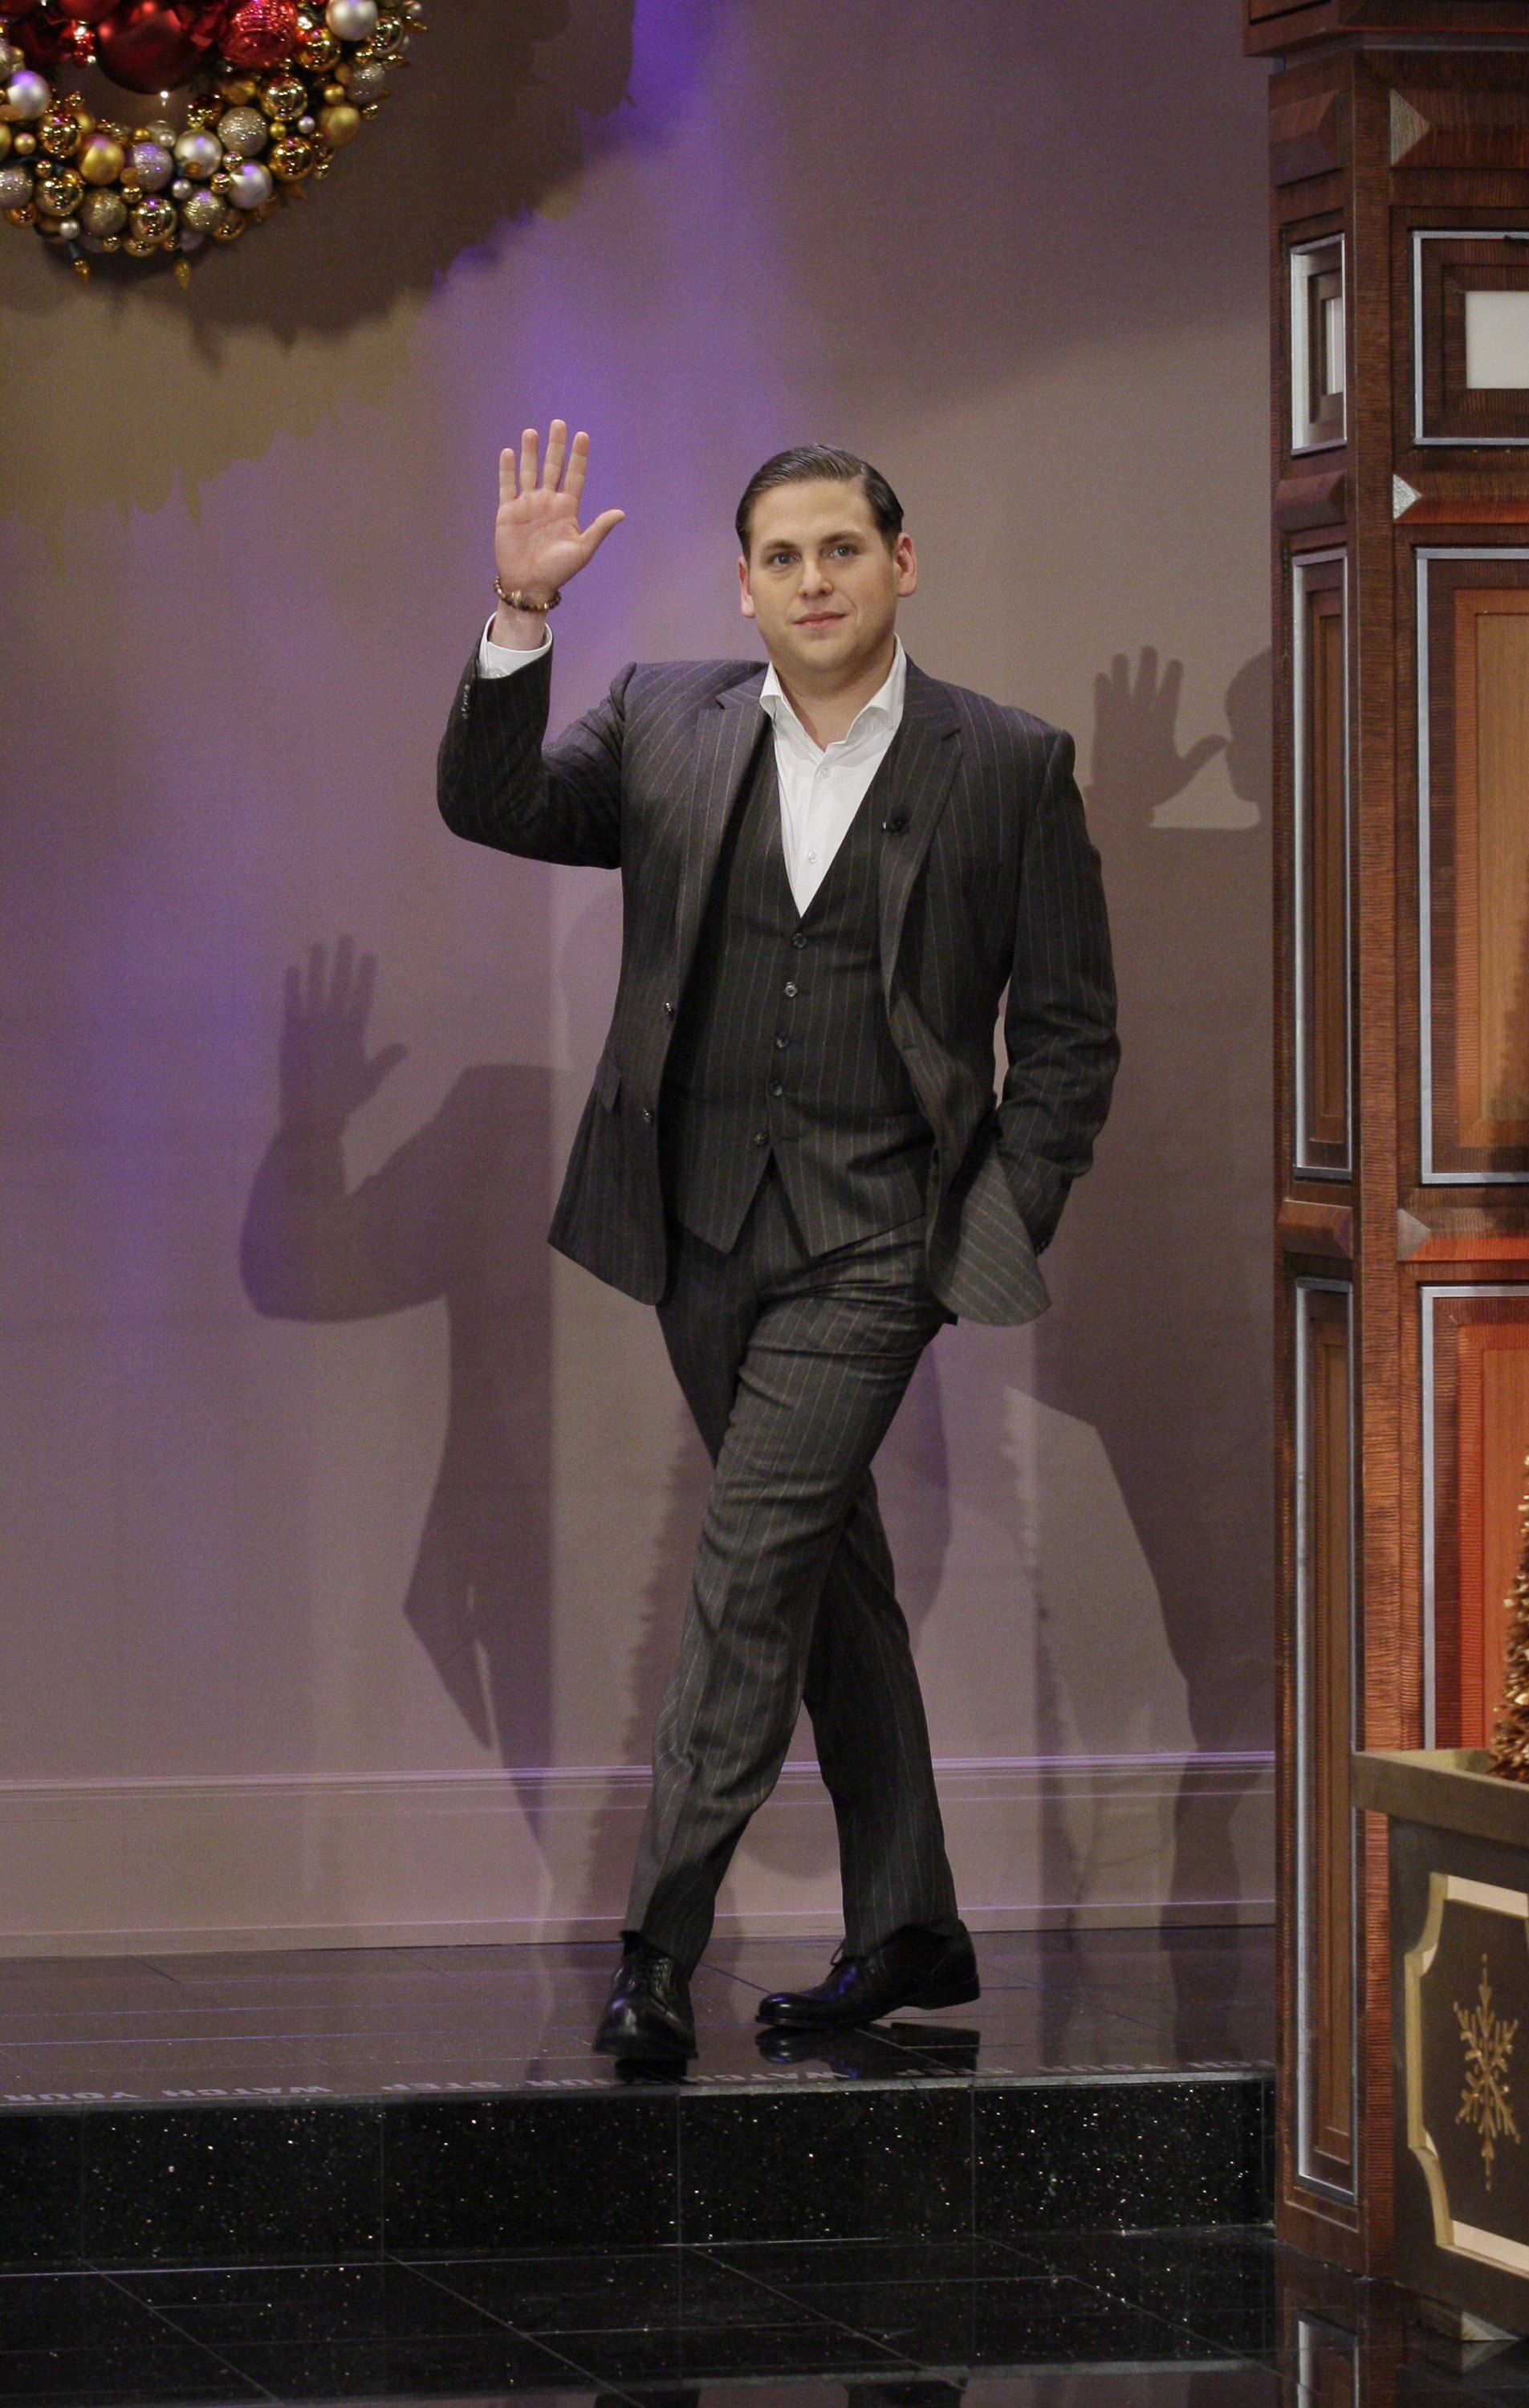 Jonah Hill Opens Up About Weight Loss, Body Image Struggles On Ellen